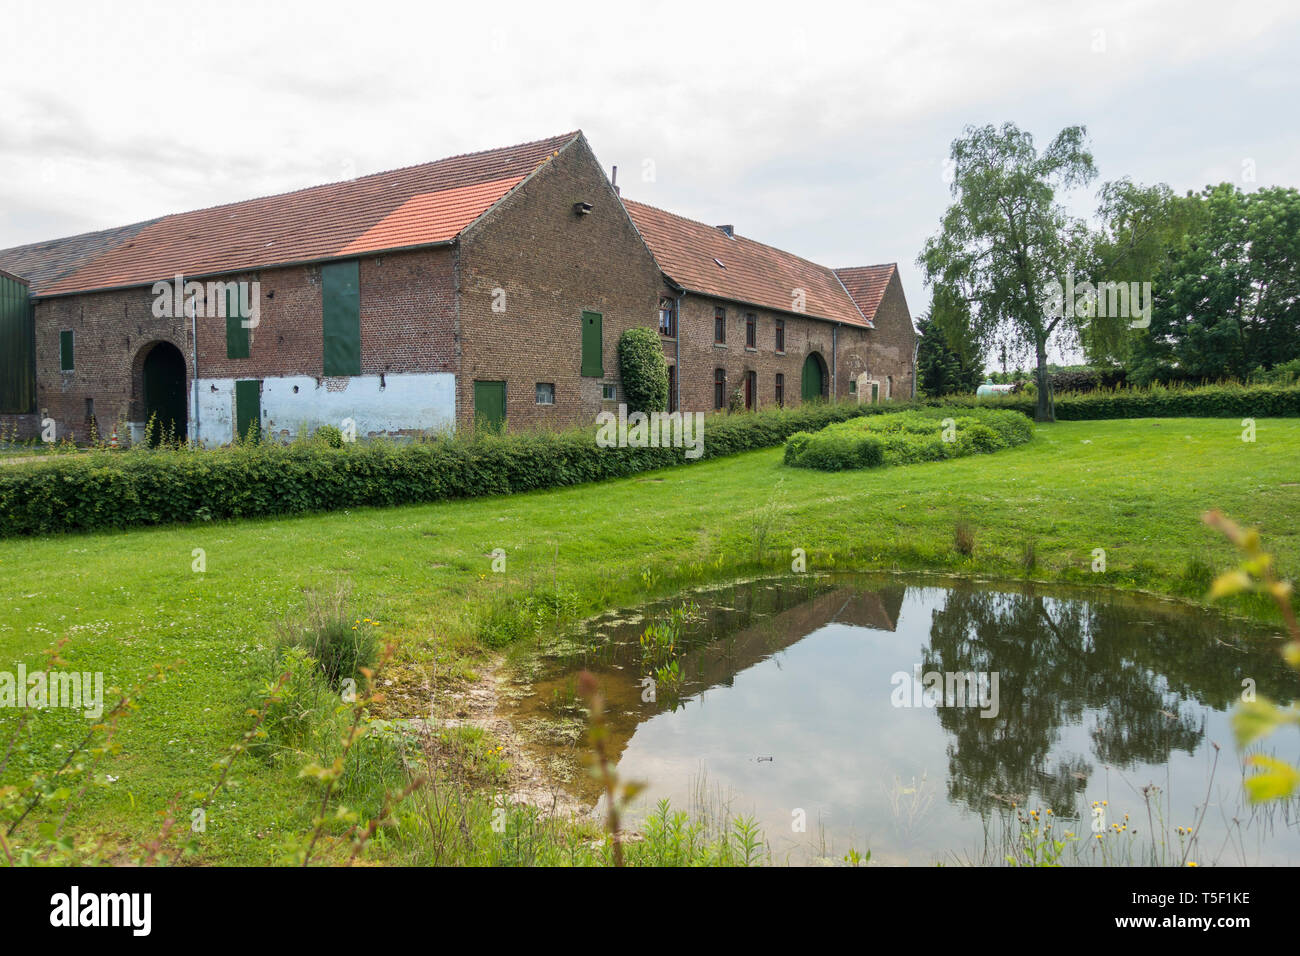 Dutch farm with pond in front, Simpelveld, Limburg, Netherlands. Stock Photo